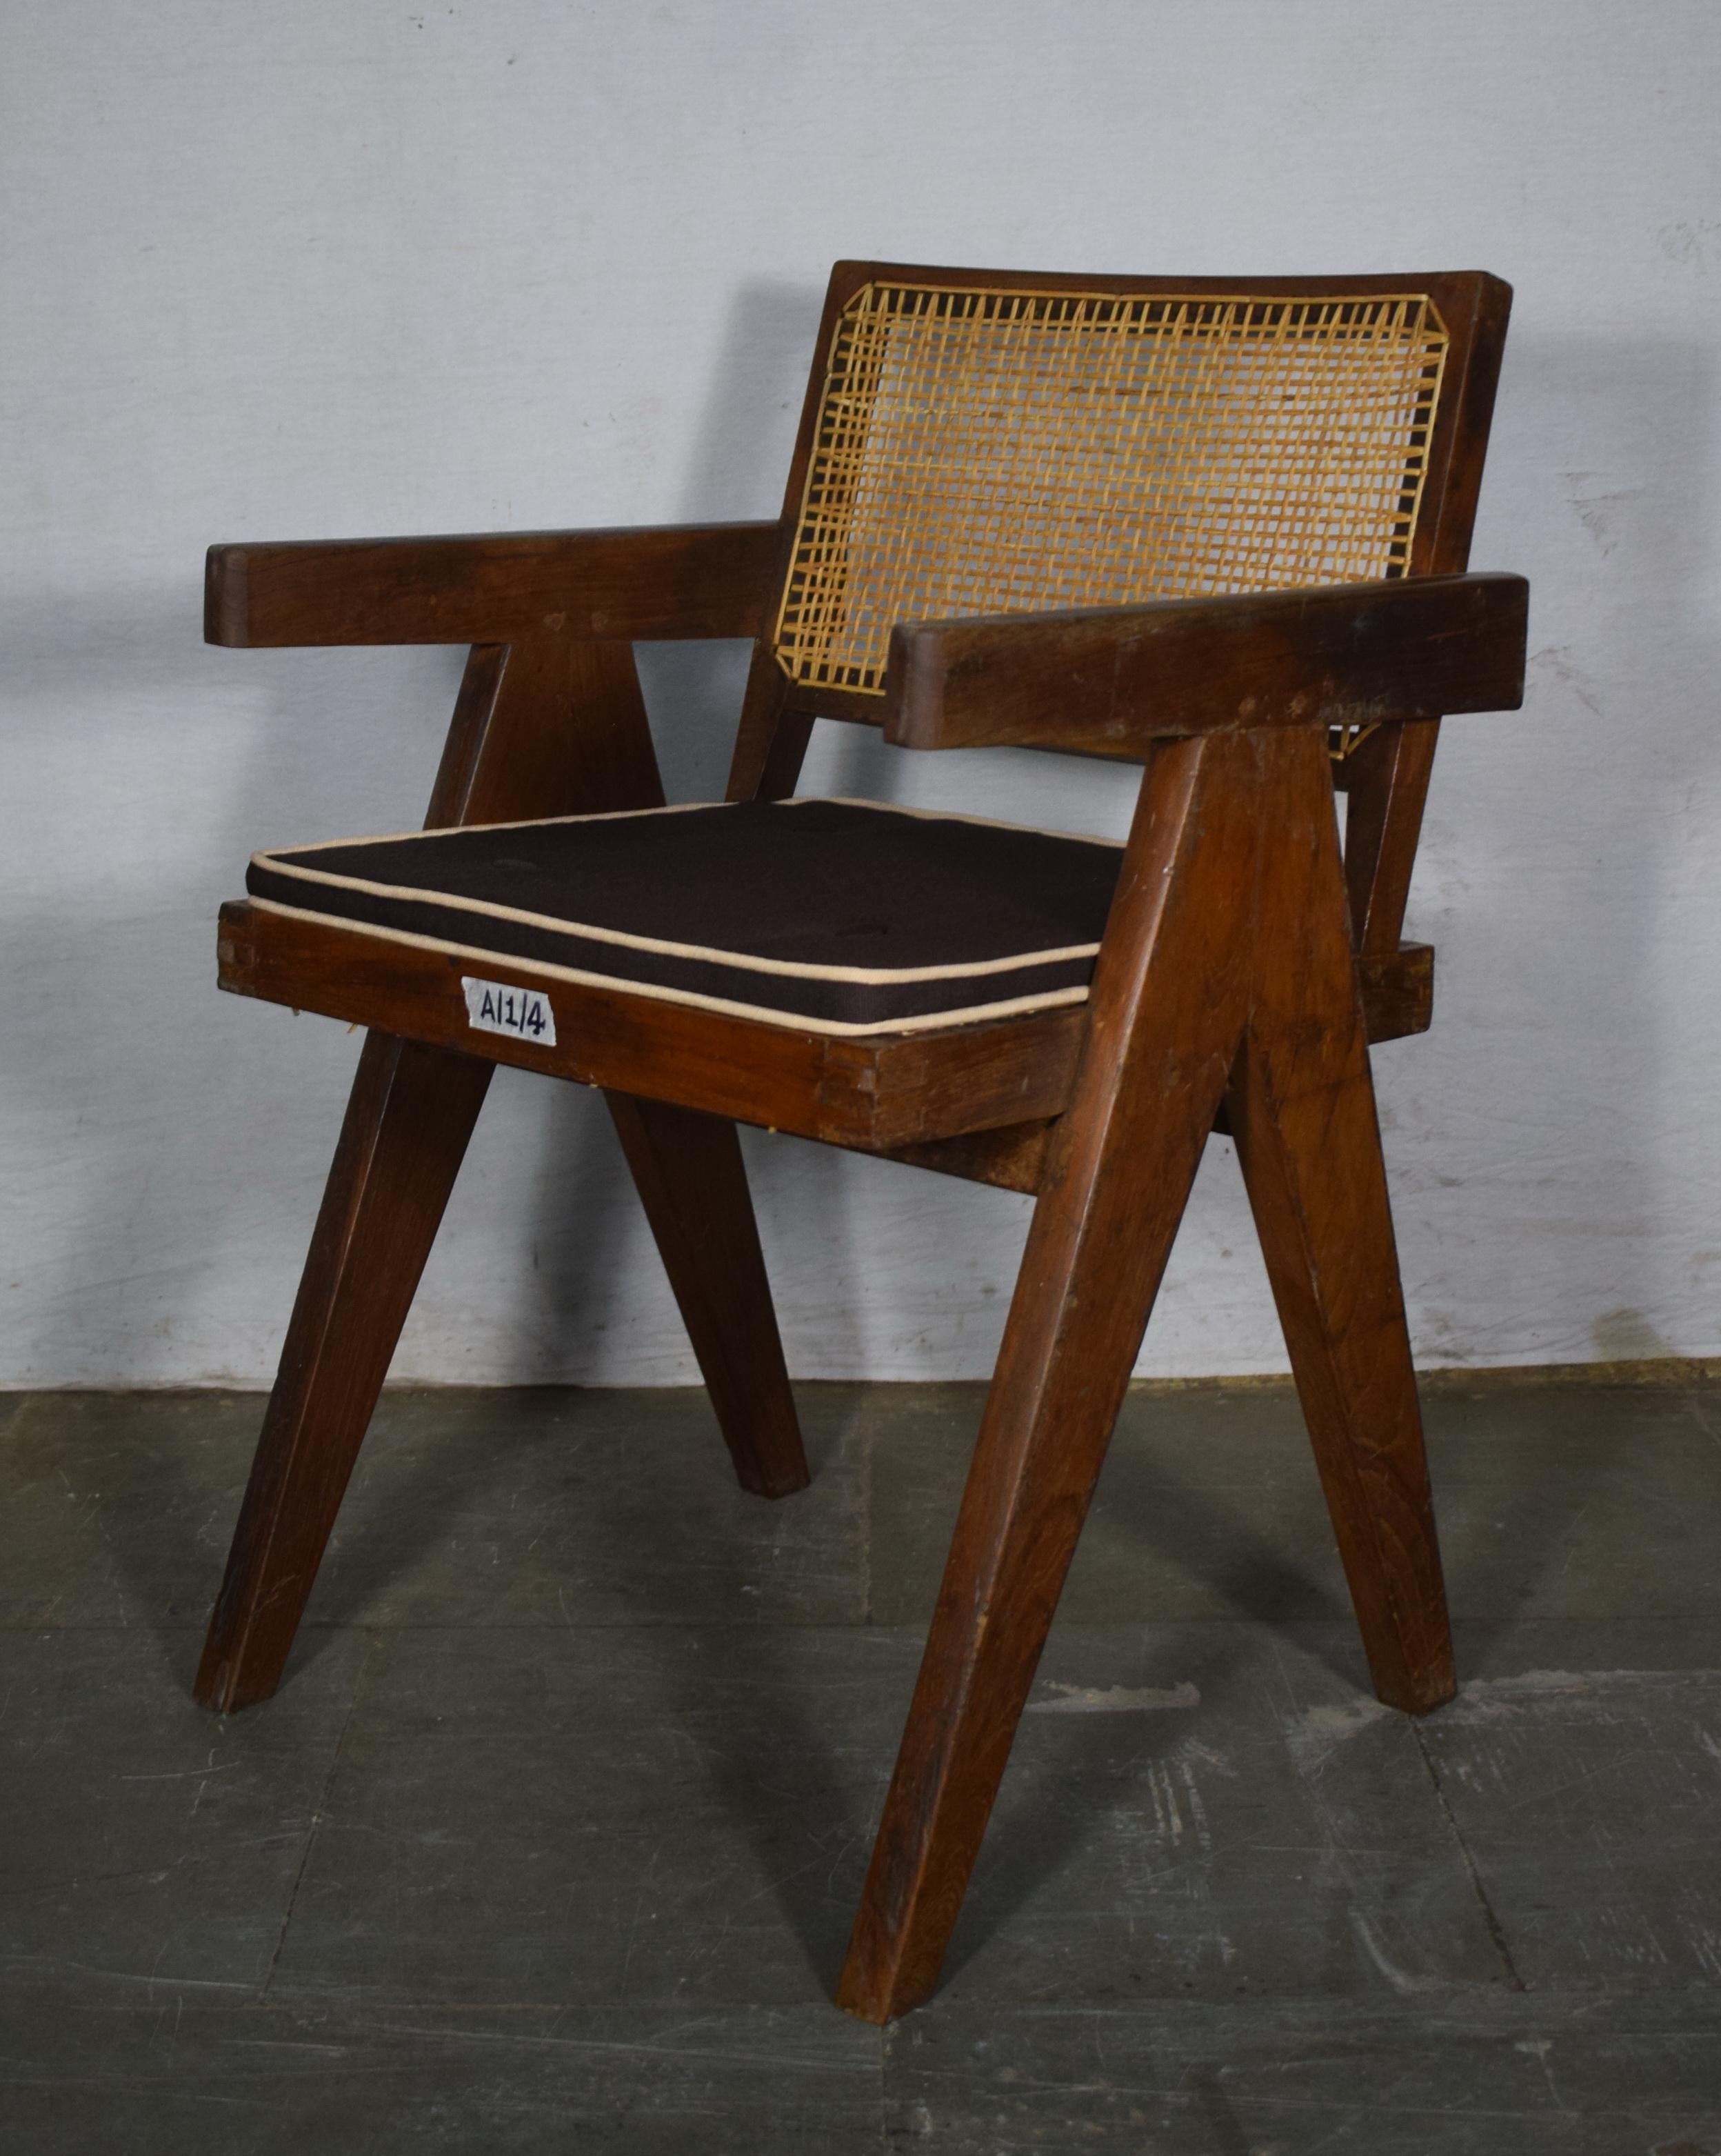 20th Century Pierre Jeanneret Set of 4 Chairs / Authentic Mid-Century Modern PJ-SI-28-B